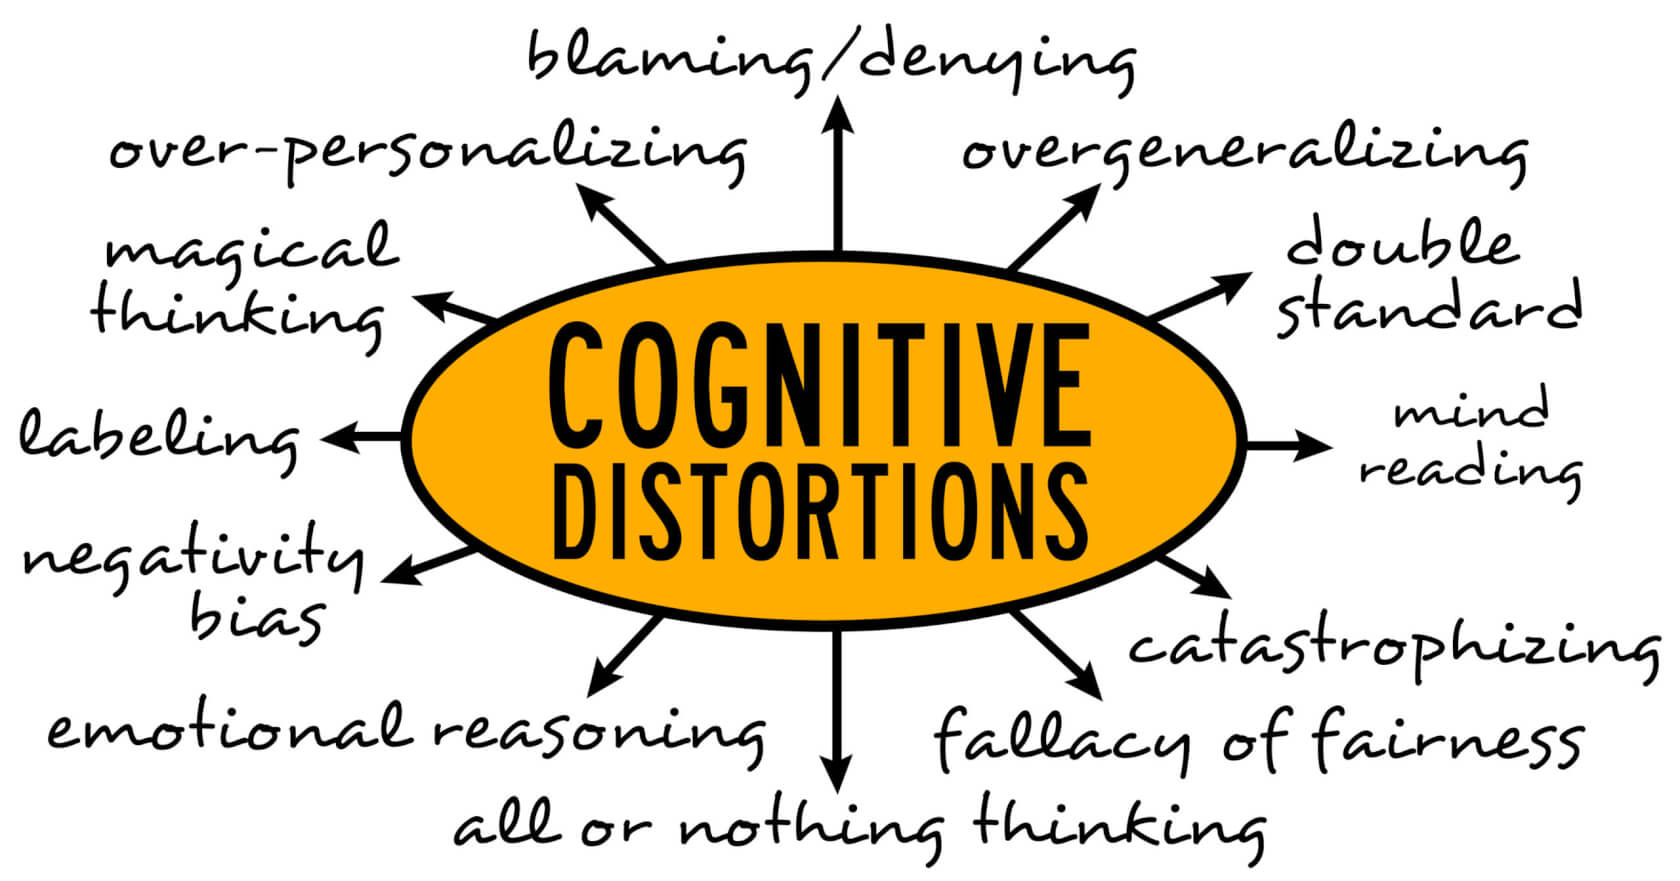 What are cognitive distortions and What to do about them?